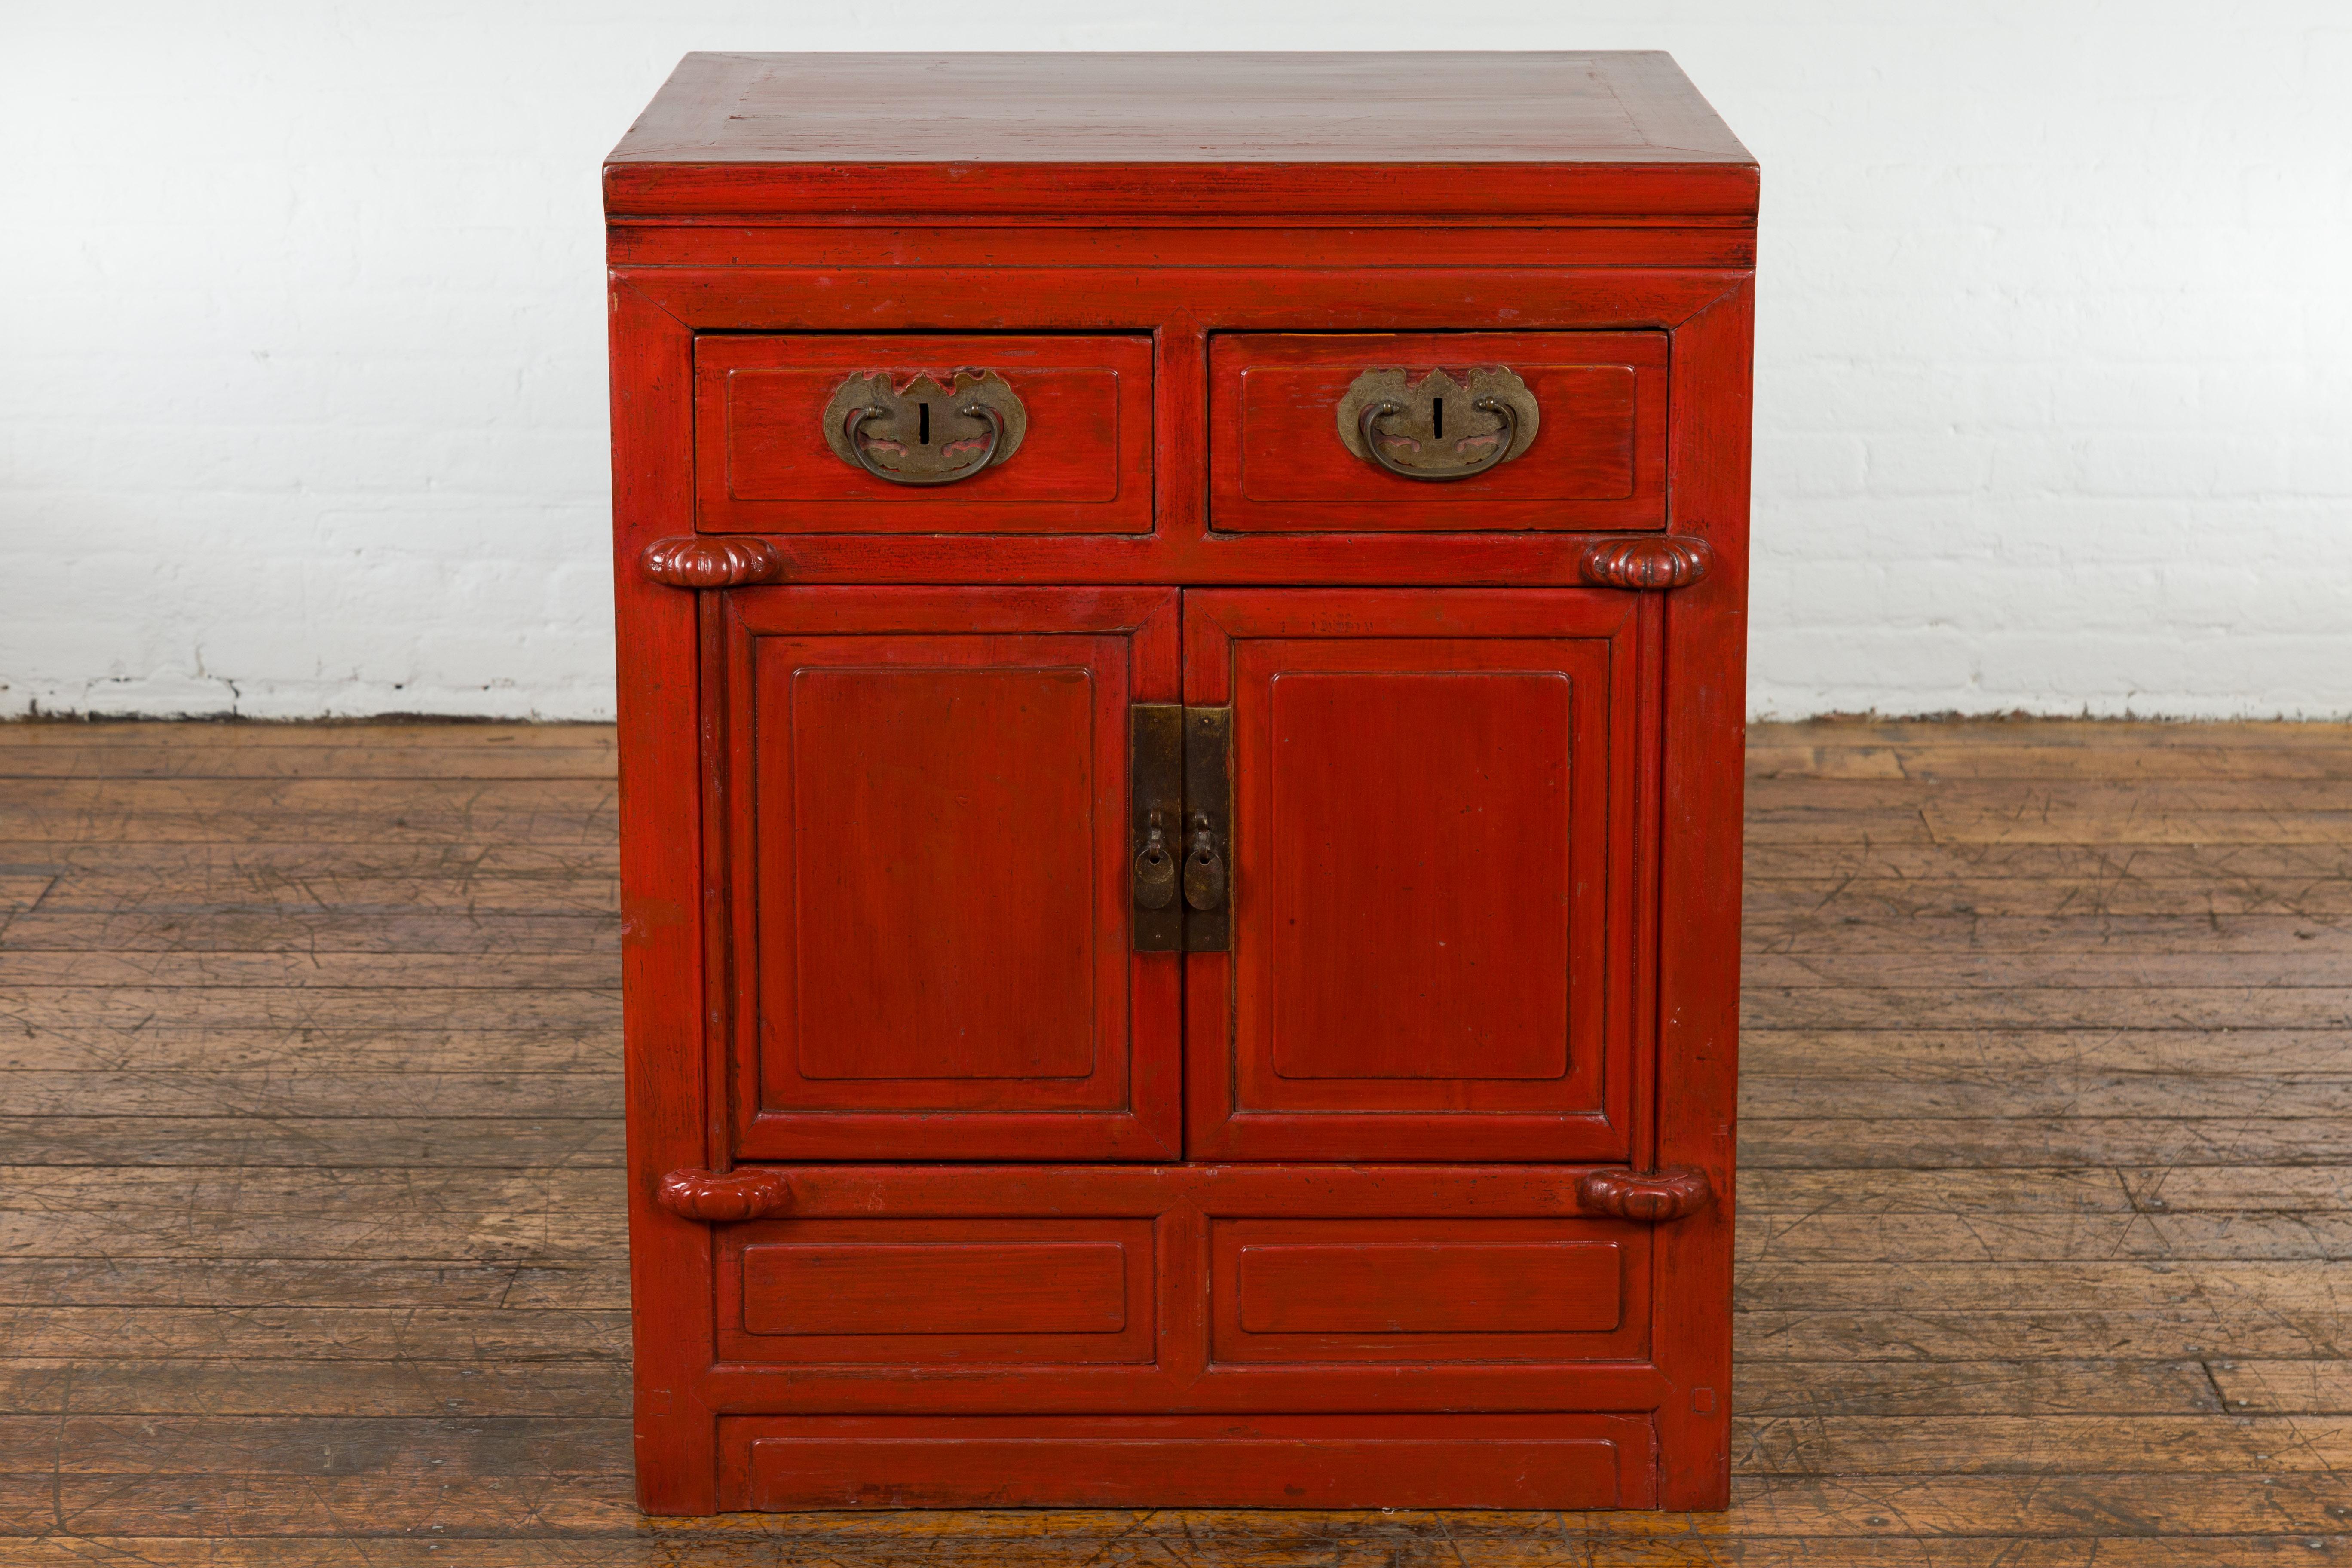 A Chinese Qing Dynasty period red lacquer cabinet from the 19th century. Embrace the allure of antique Chinese craftsmanship with this Qing Dynasty period red lacquer cabinet, a quintessential 19th-century artifact. This antique storage unit